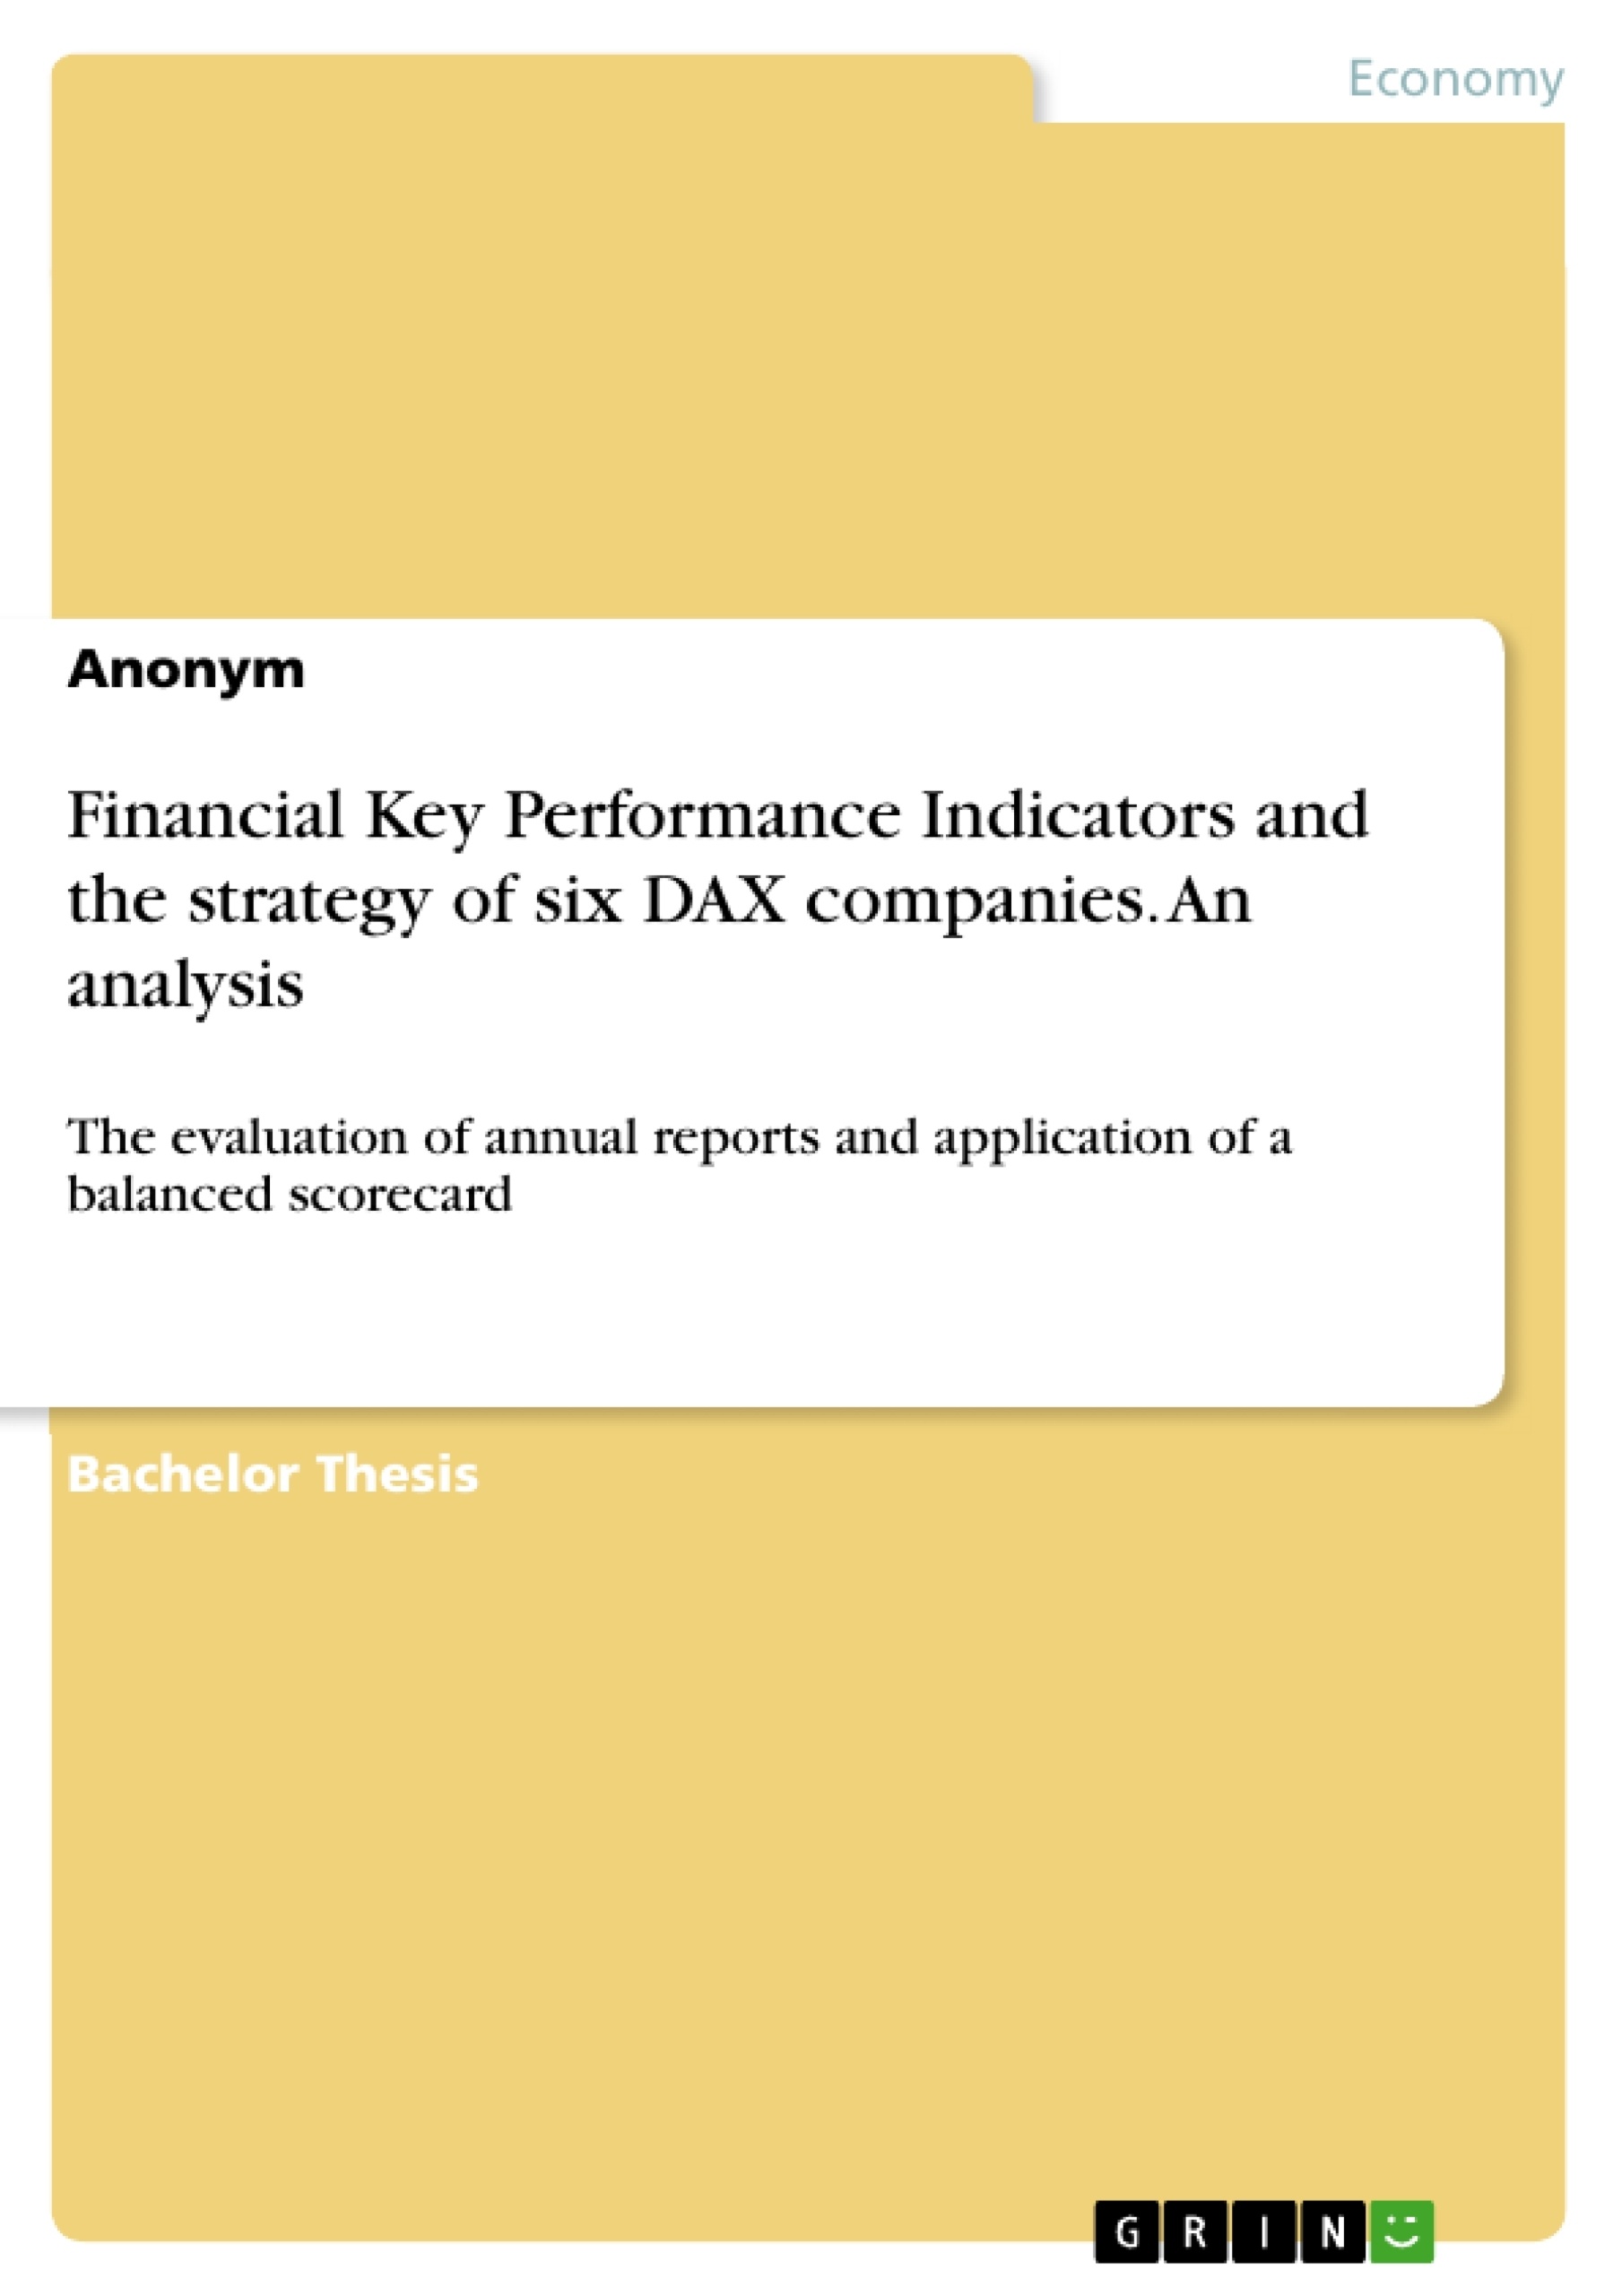 Title: Financial Key Performance Indicators and the strategy of six DAX companies. An analysis